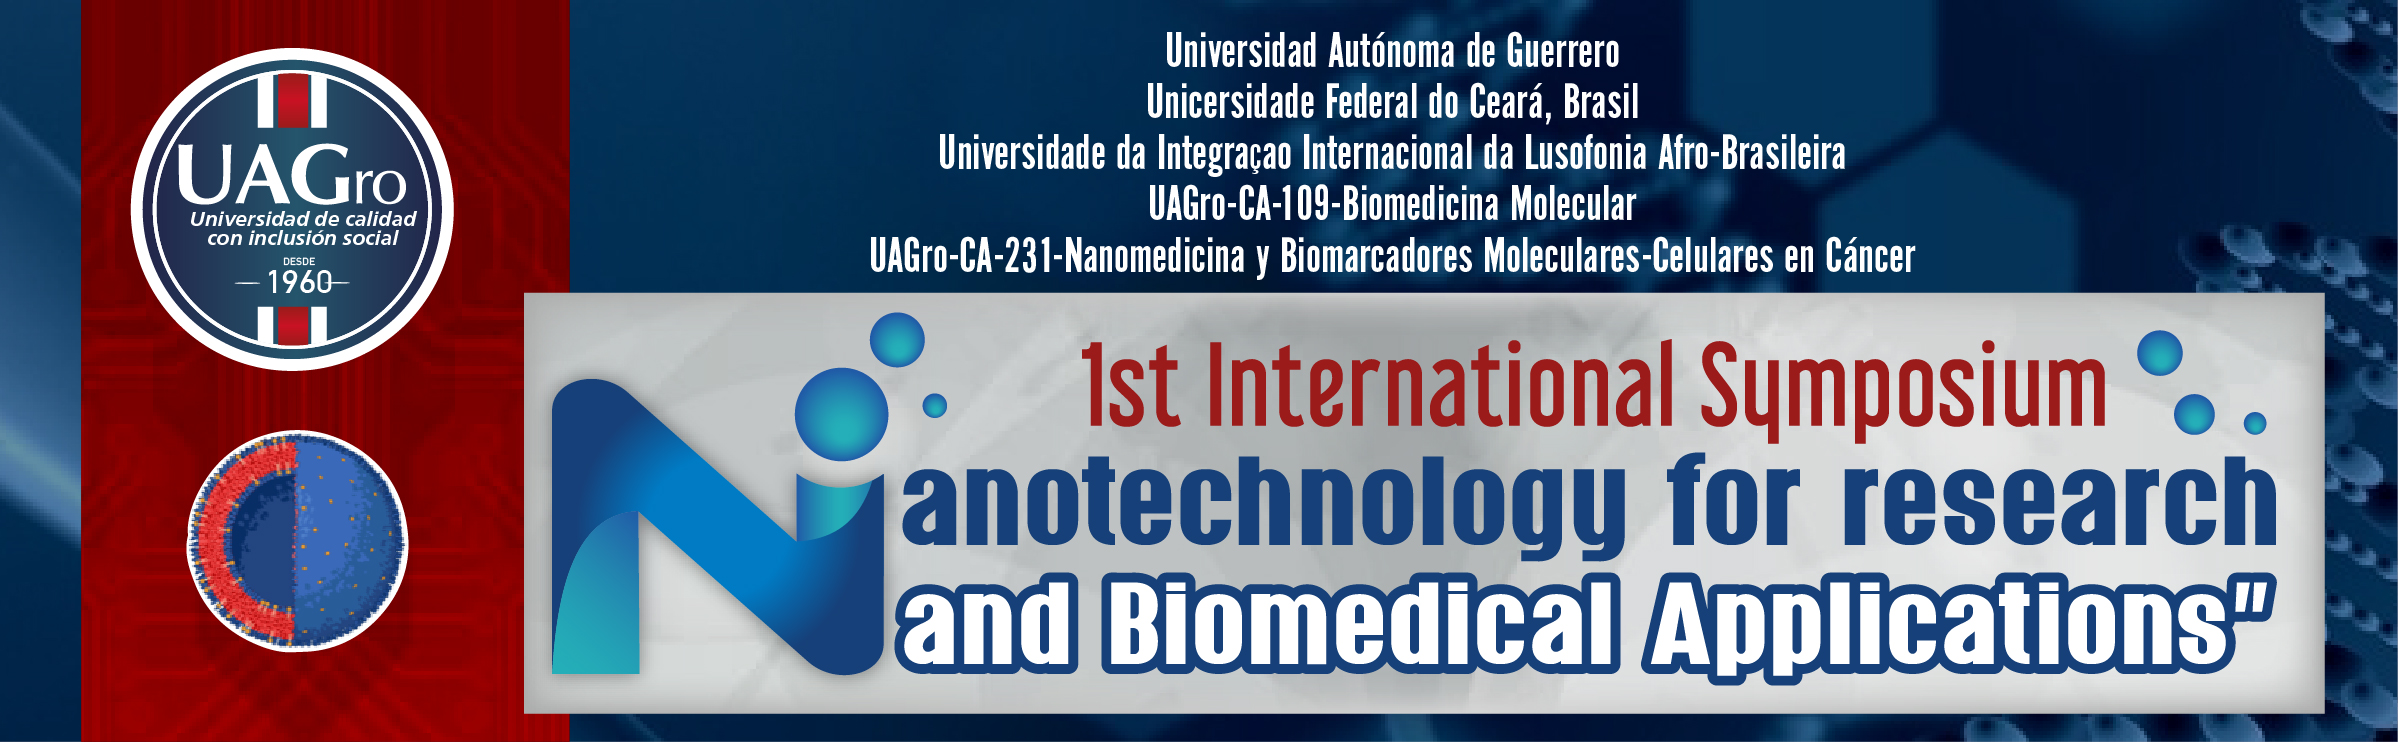 Symposium Nanotechnology For Research And Biomedical Applications